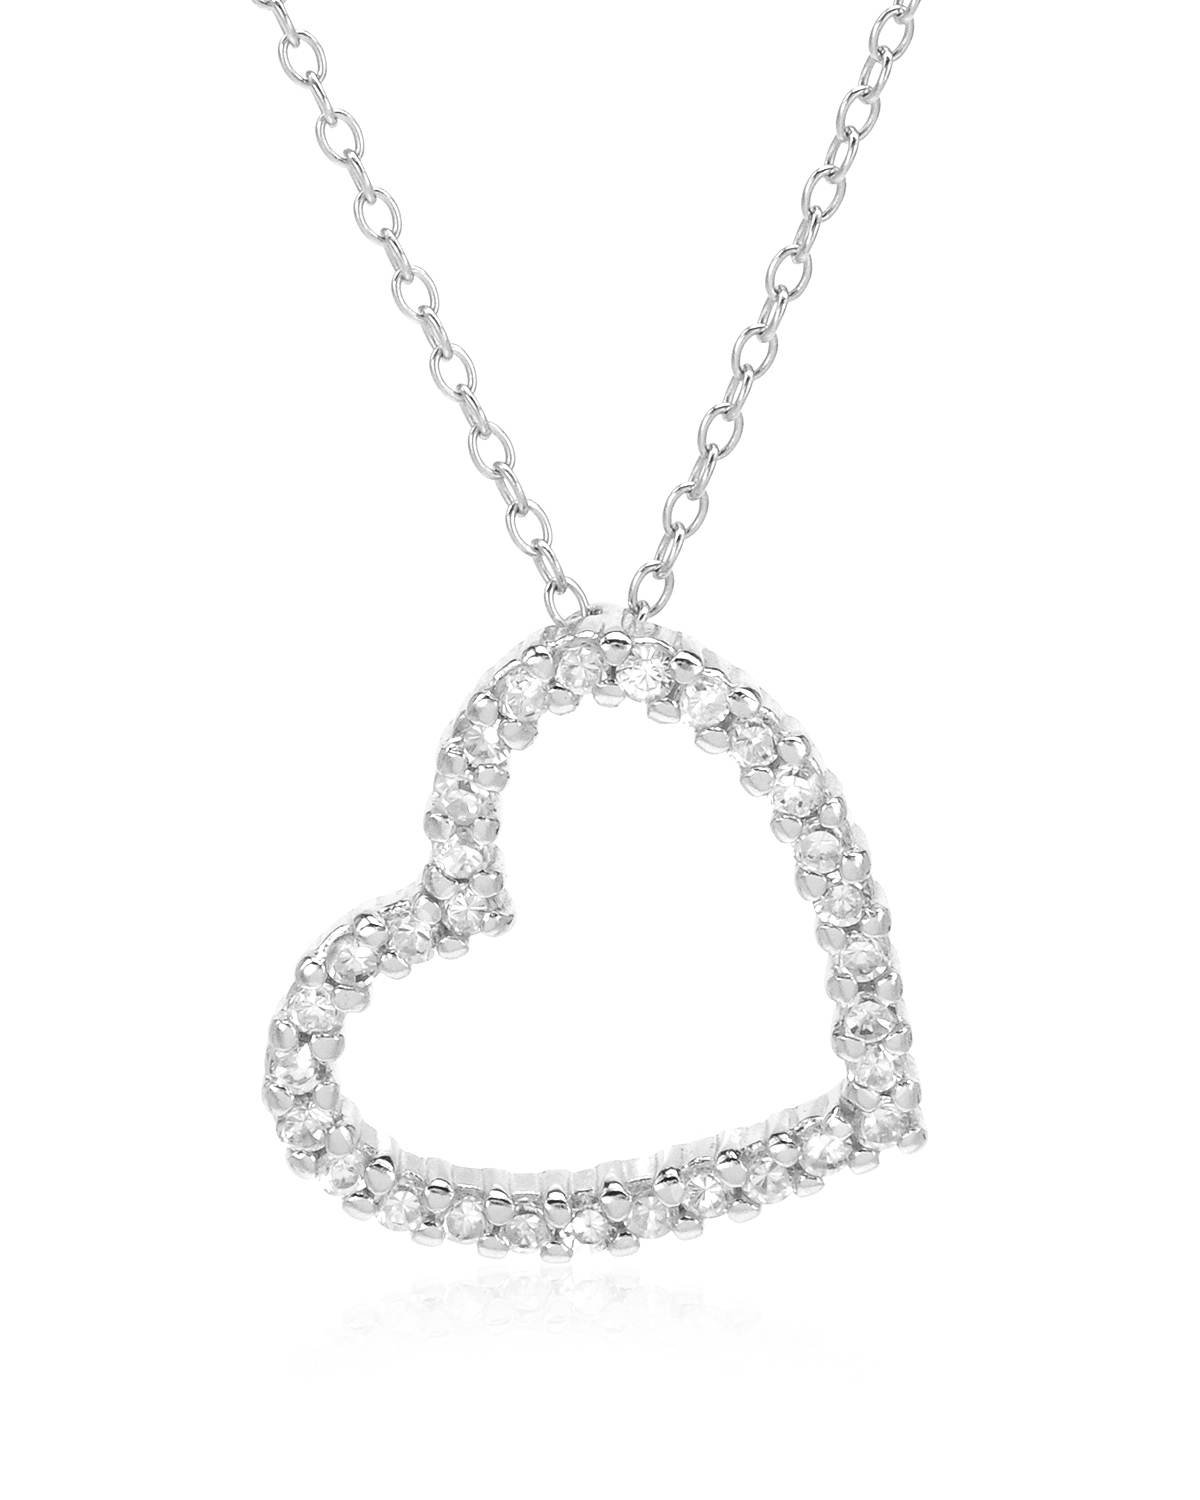 Diamond heart pendant & chain crafted in sterling silver